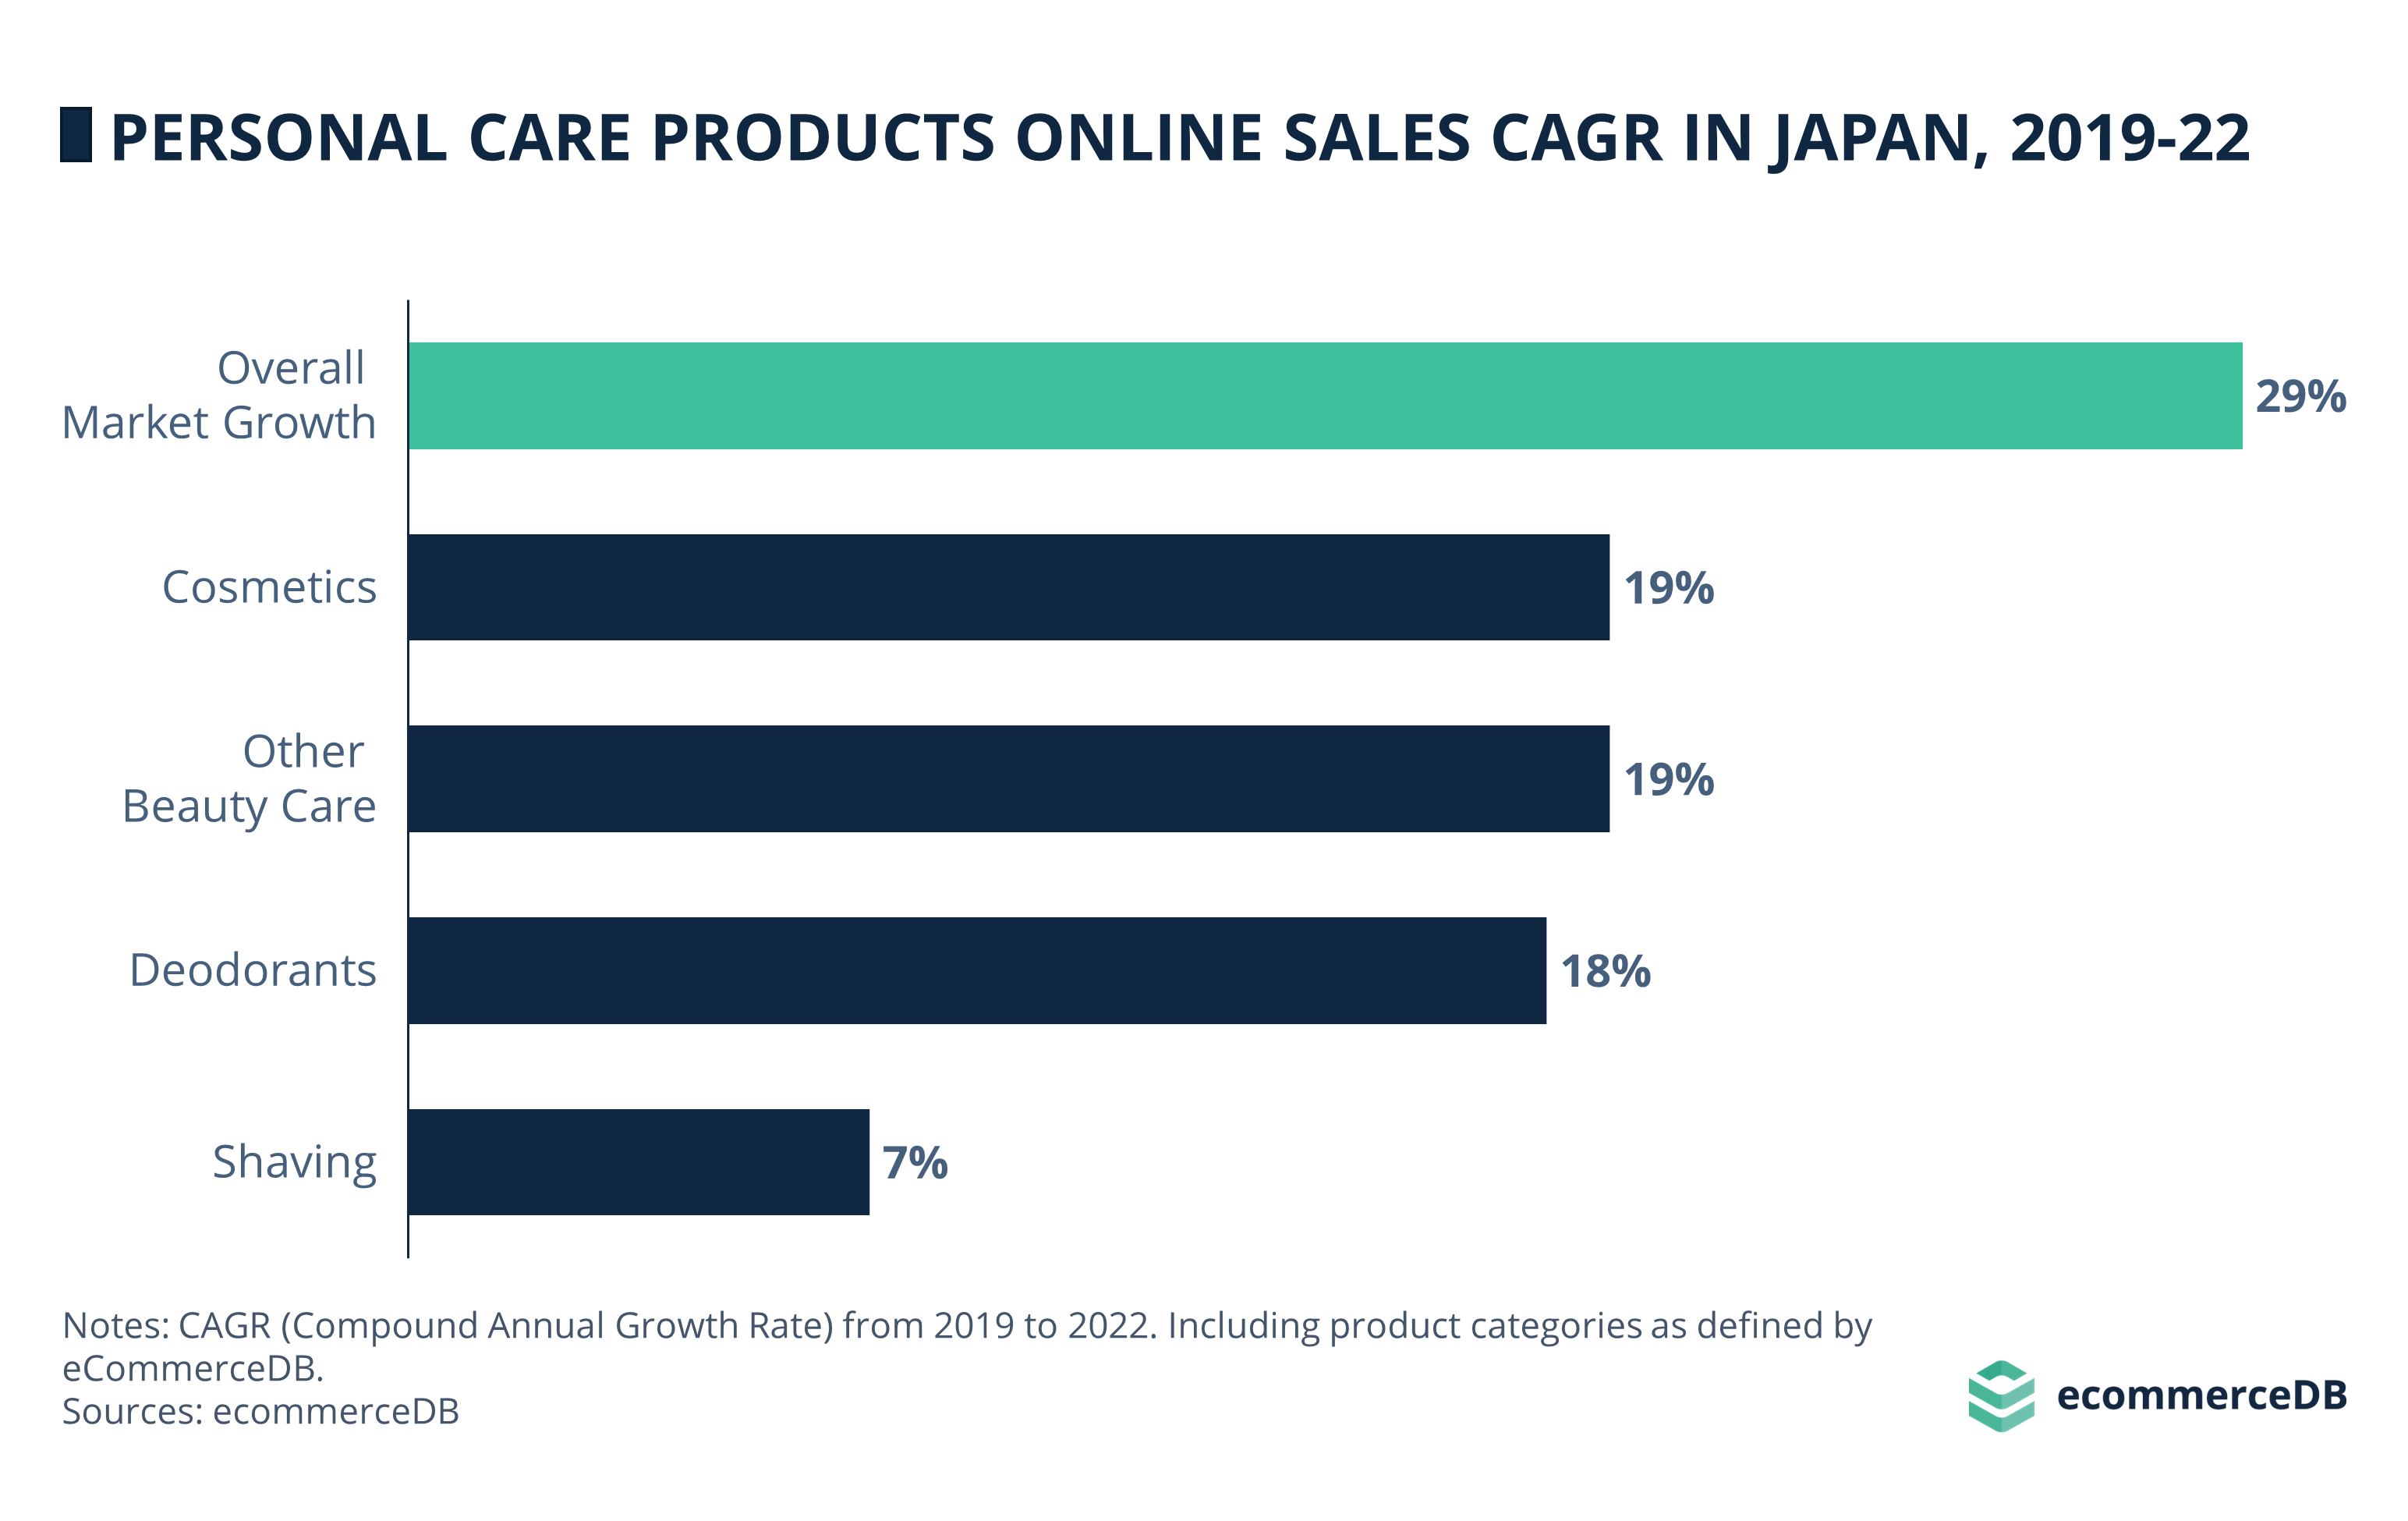 Personal Care Products Online Sales CAGR (19-22) in Japan